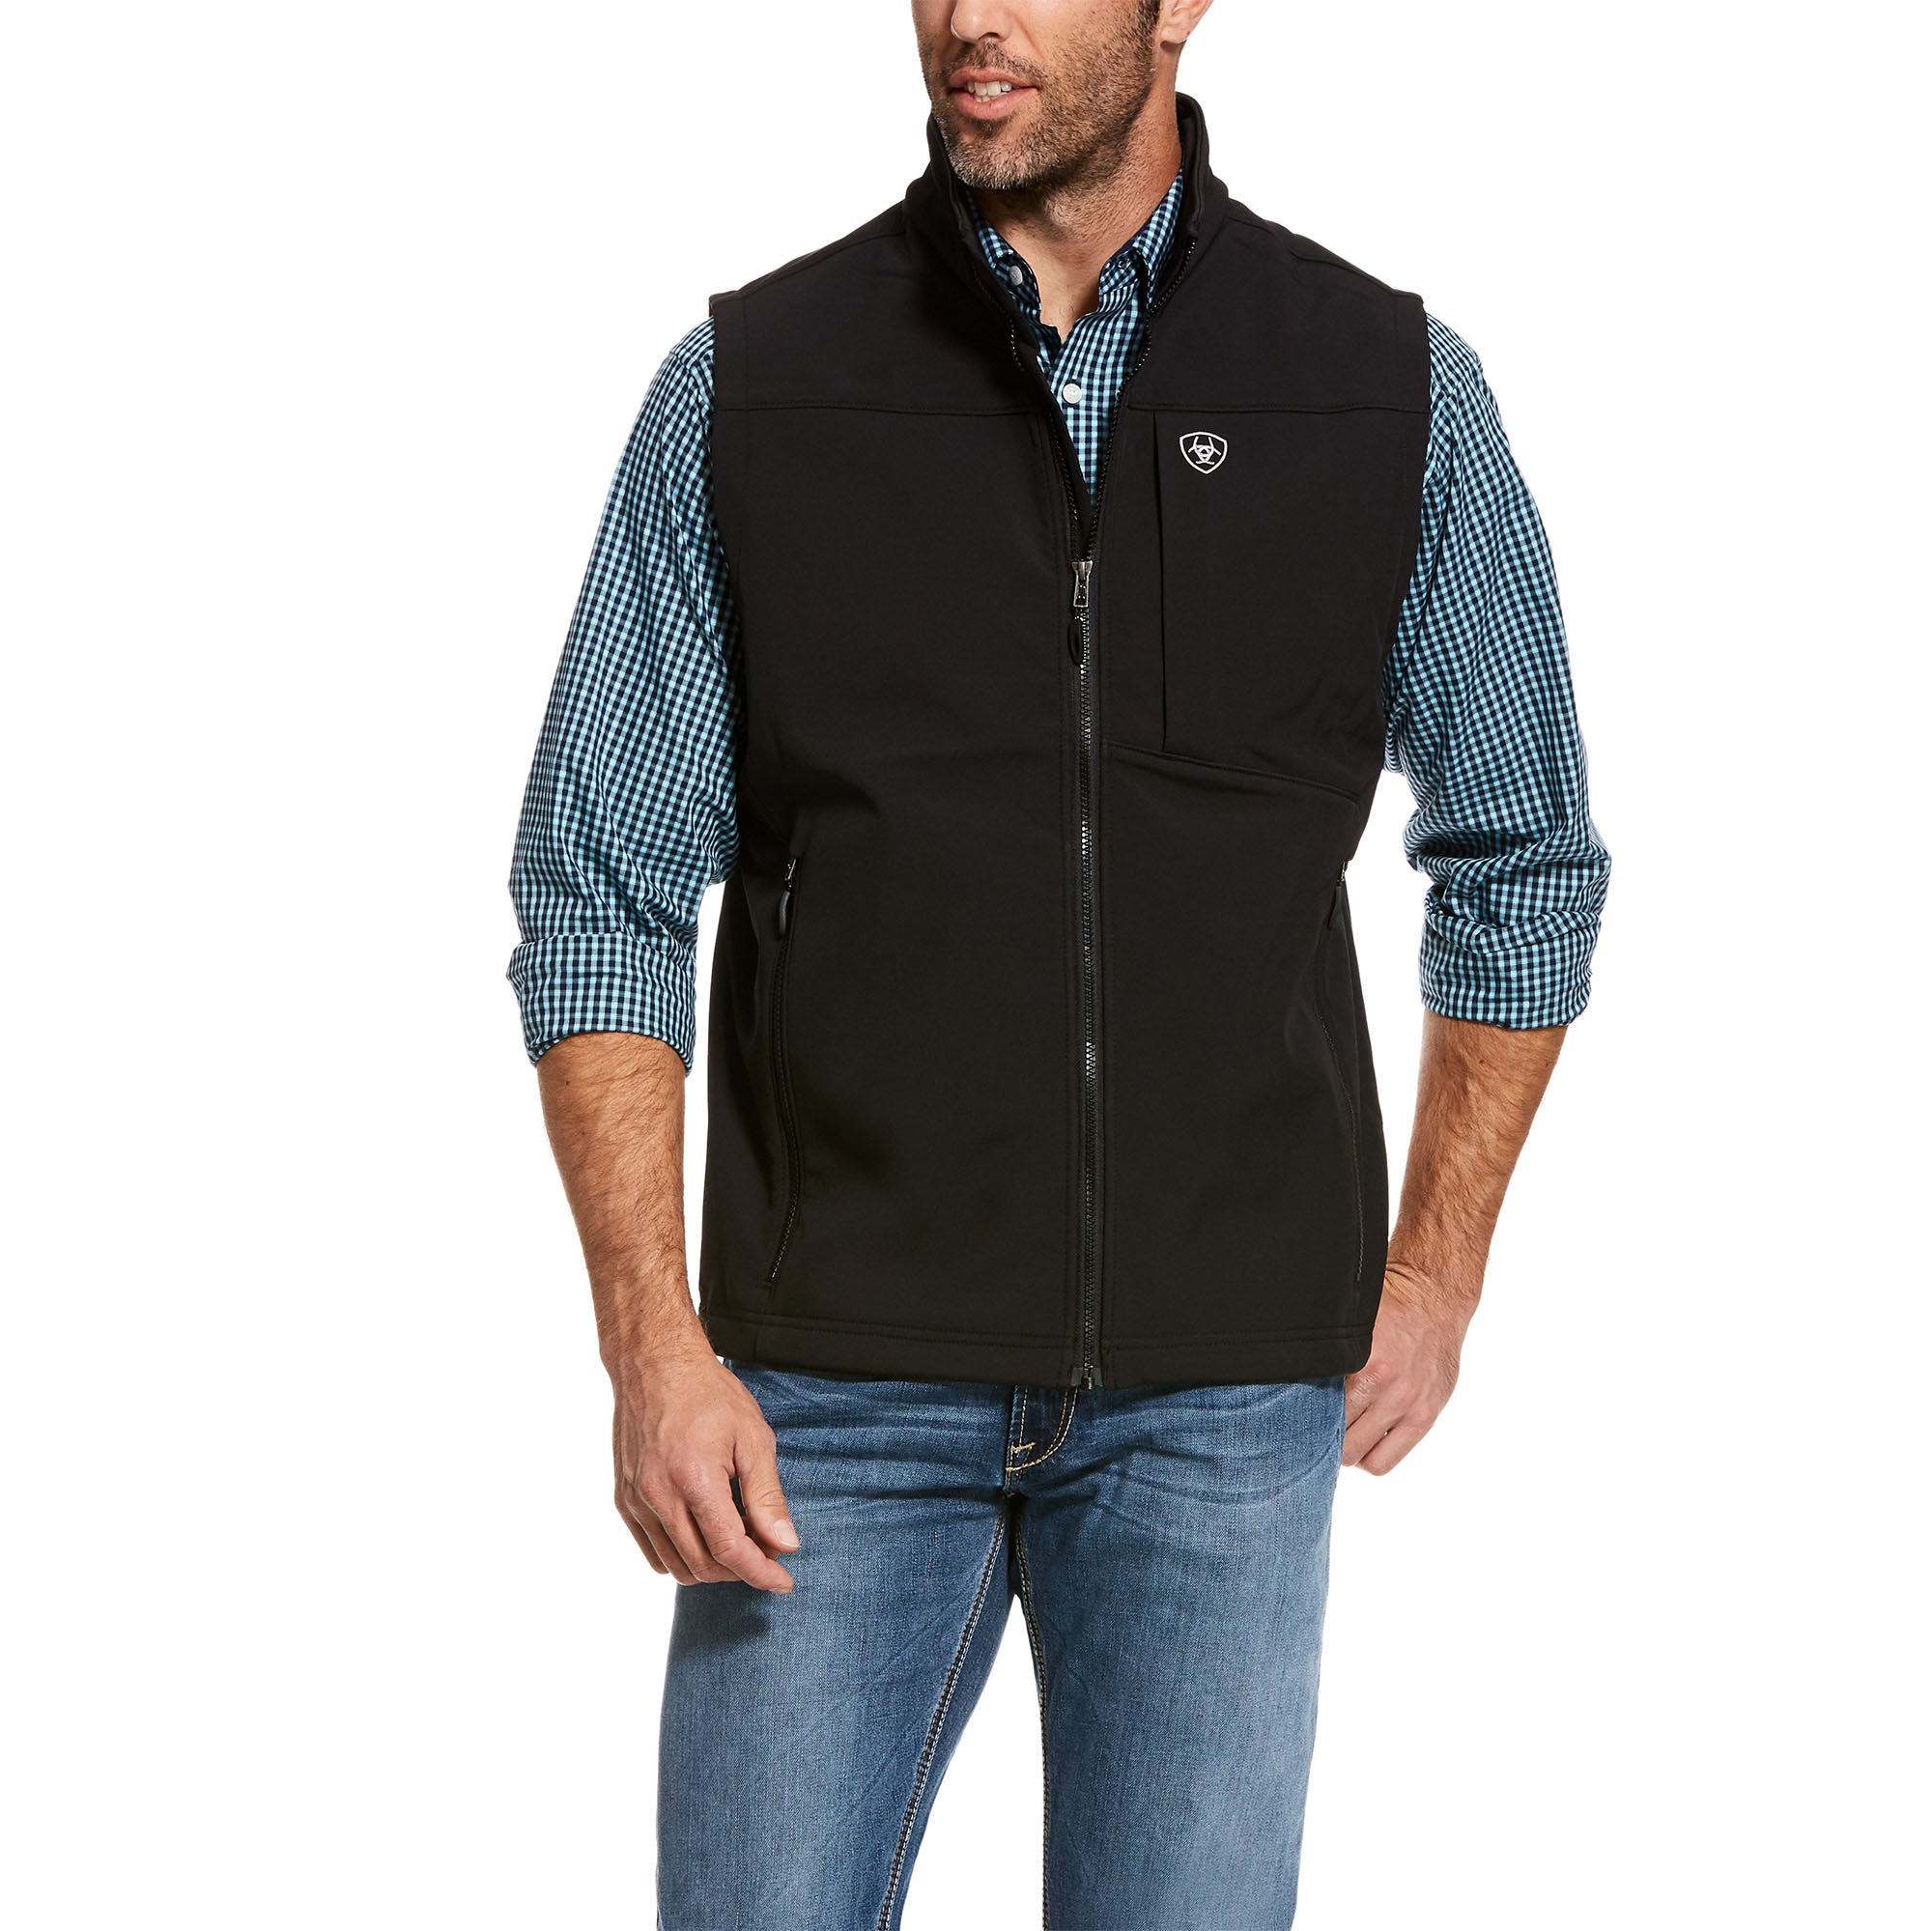 Image of Ariat Men's Vernon 2.0 Softshell Vest front view